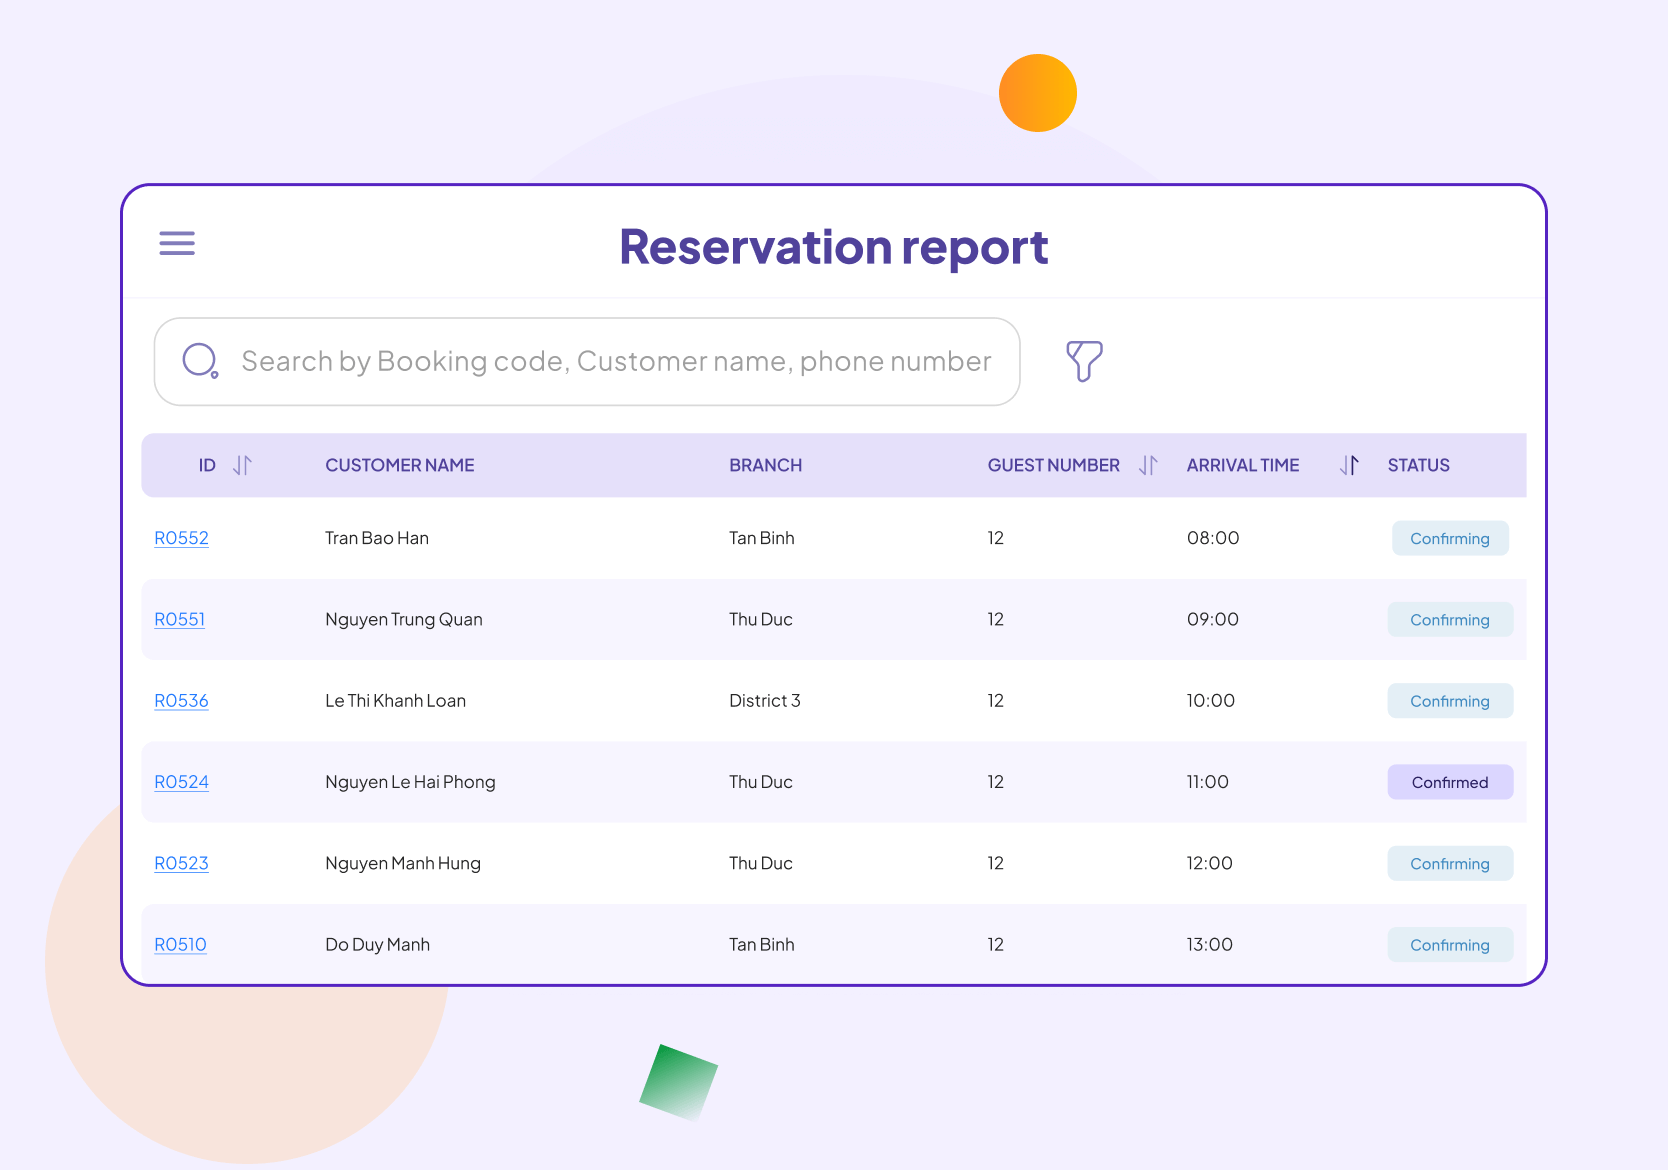 Statistics - Detailed reports on reservation
                    status